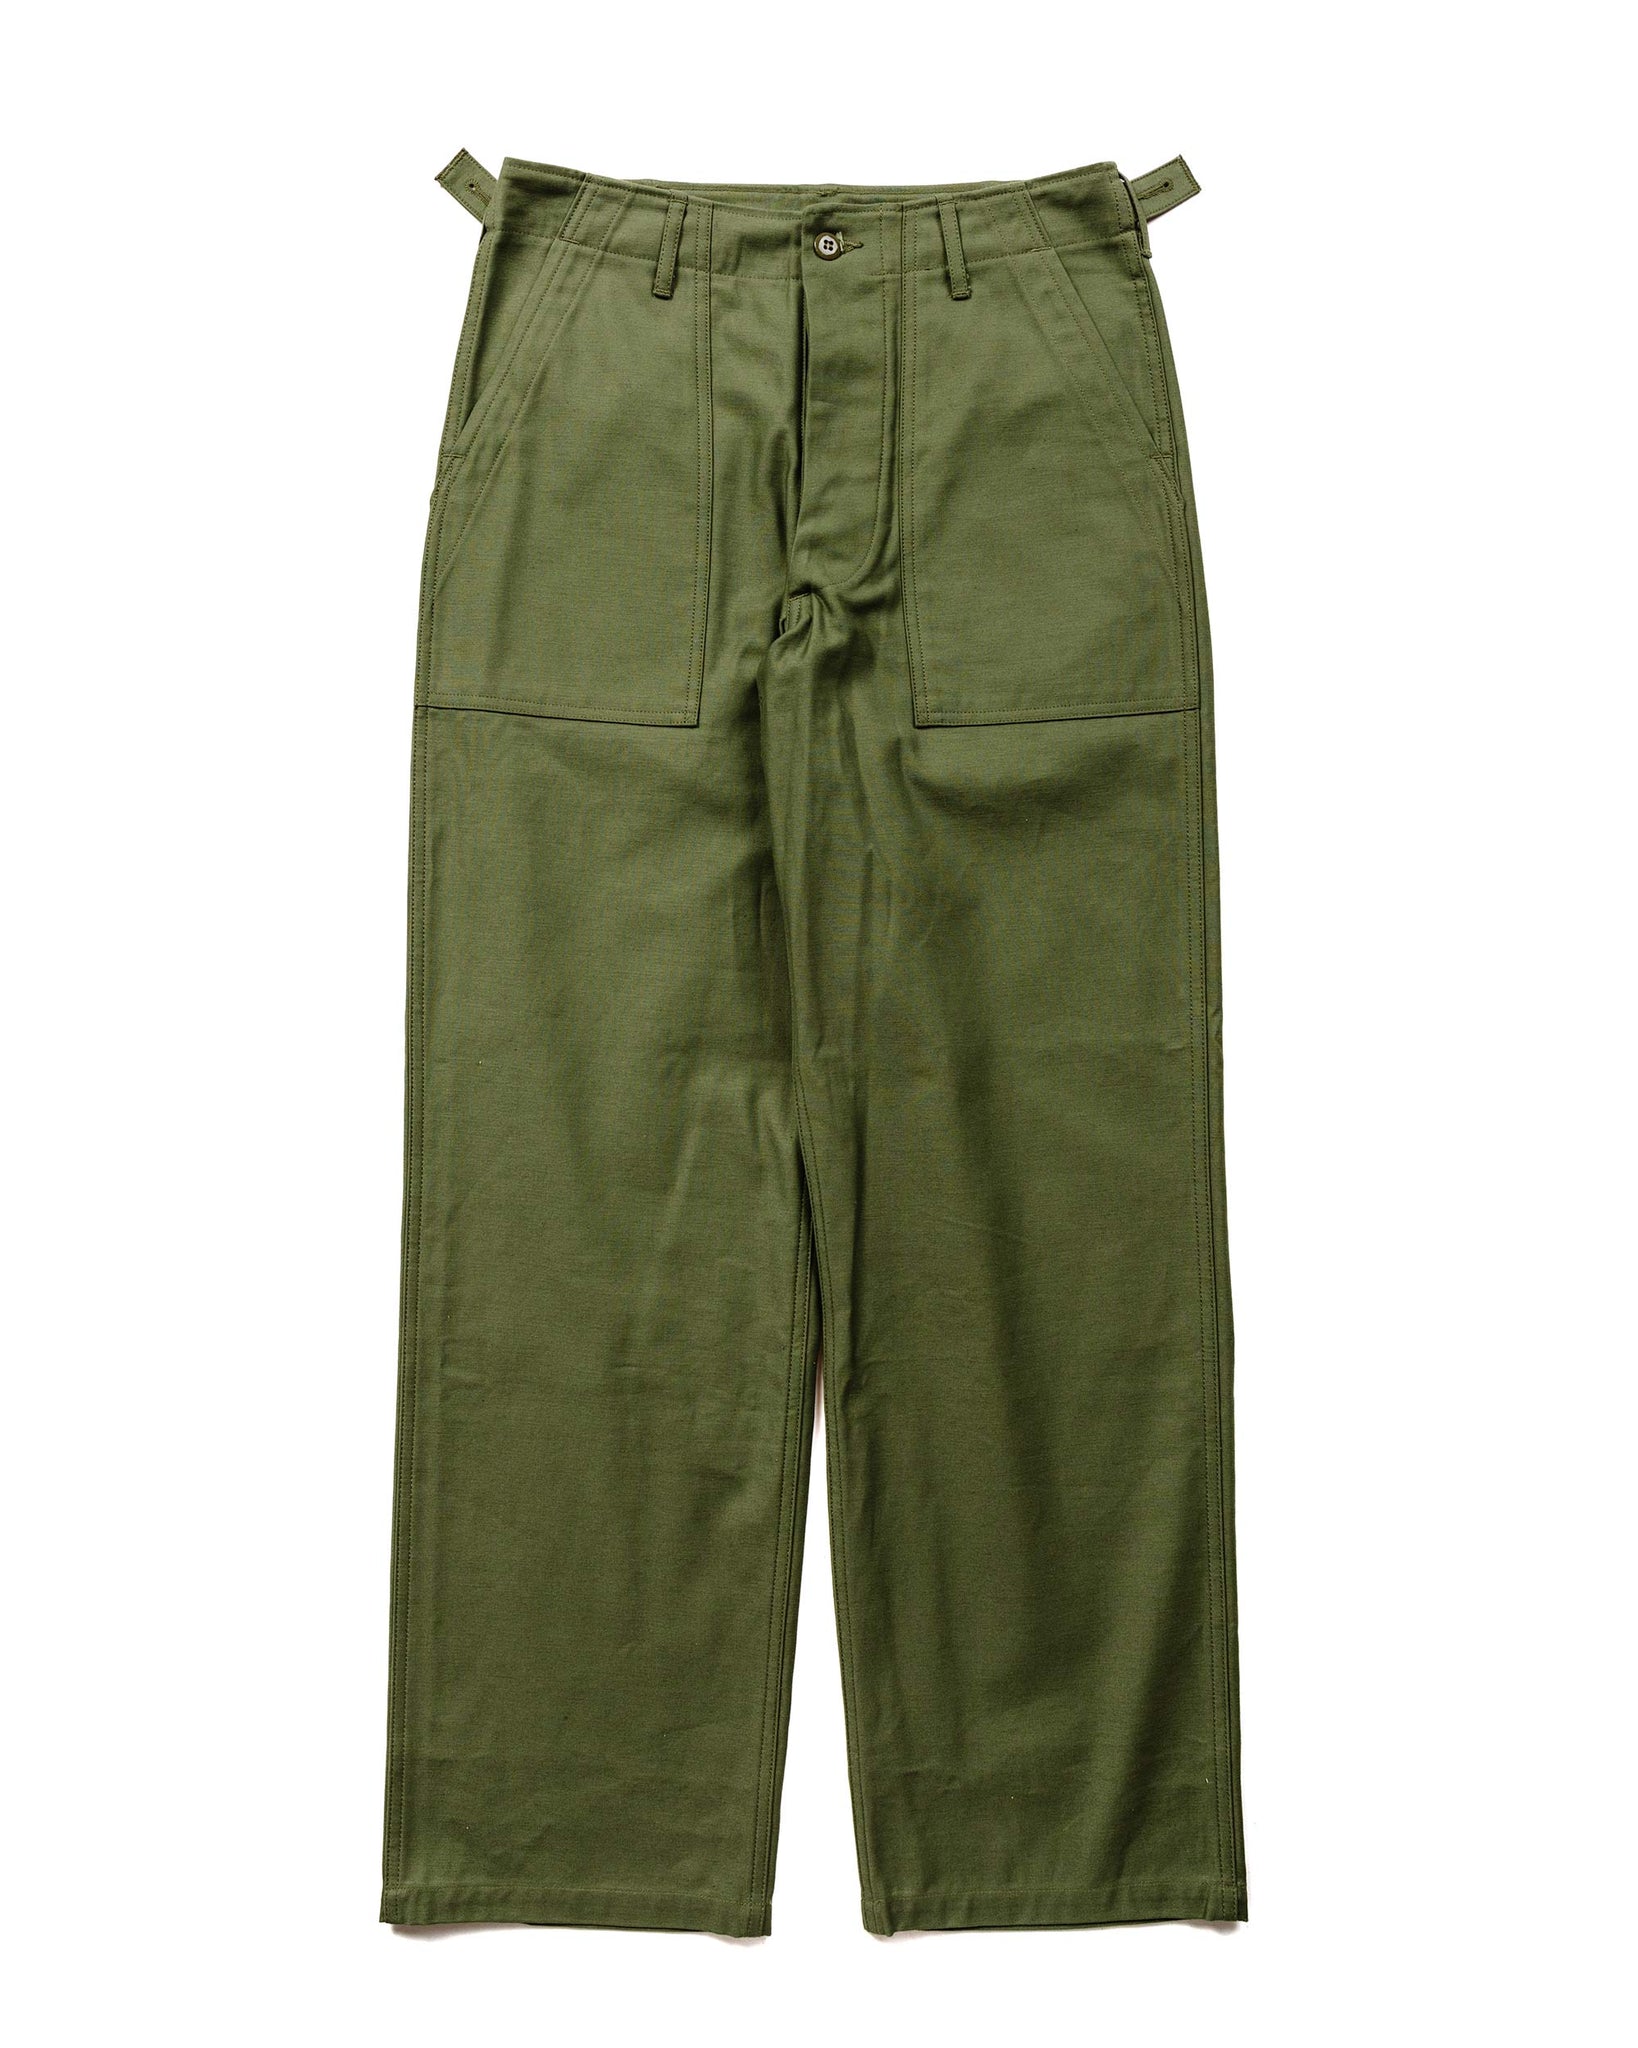 The Real McCoy's MP23003 Trousers, Men's, Cotton Sateen, OG-107 Olive